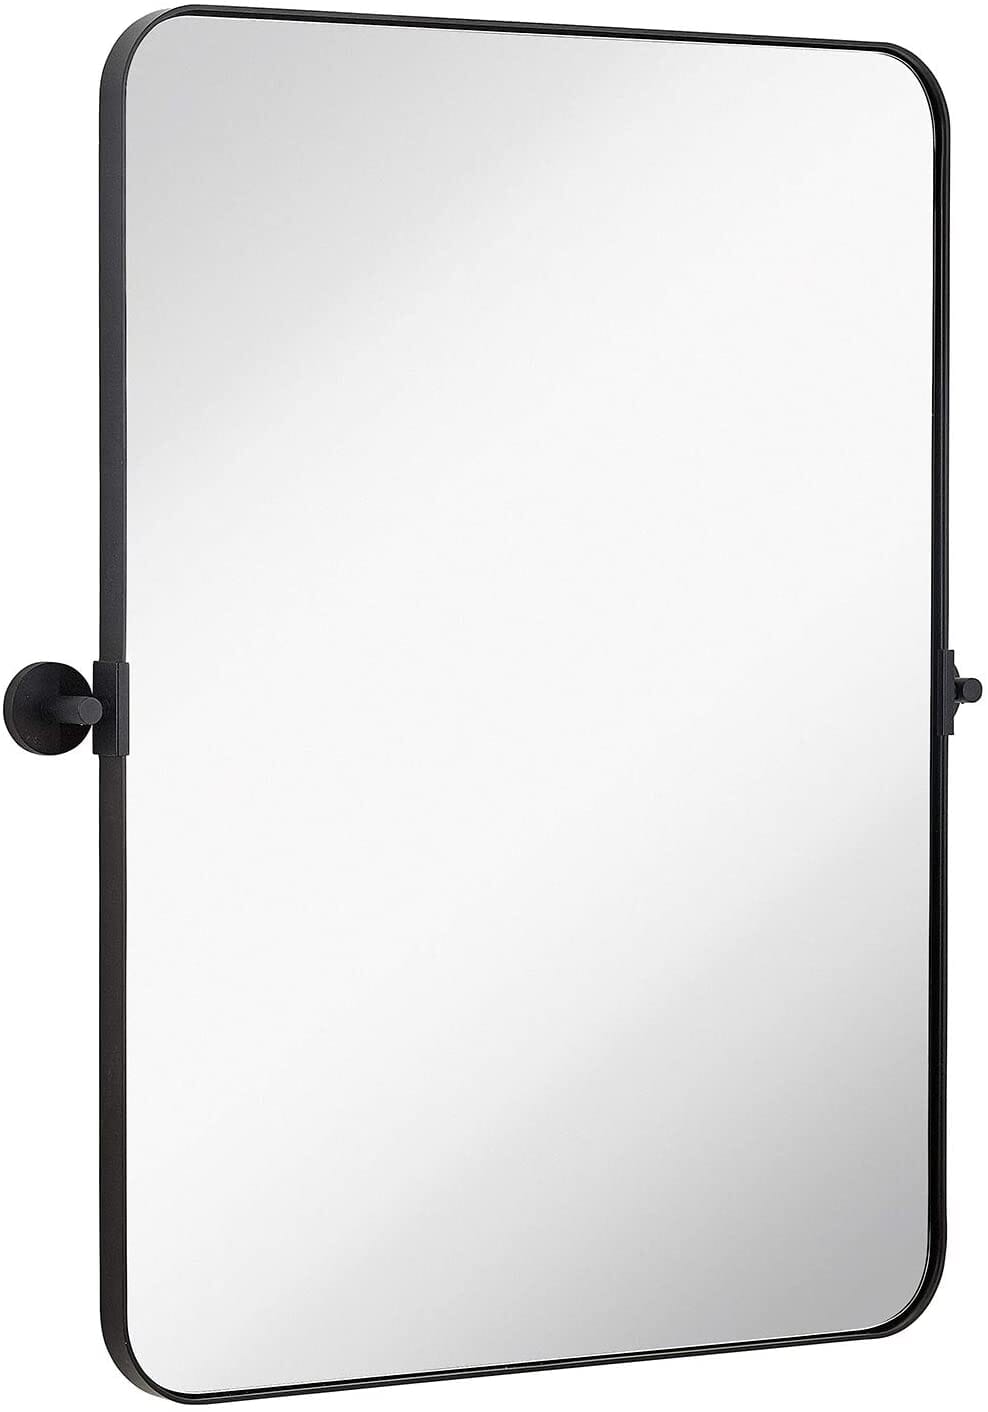 Round Pivot Mirror with Adjustable Wall Mount